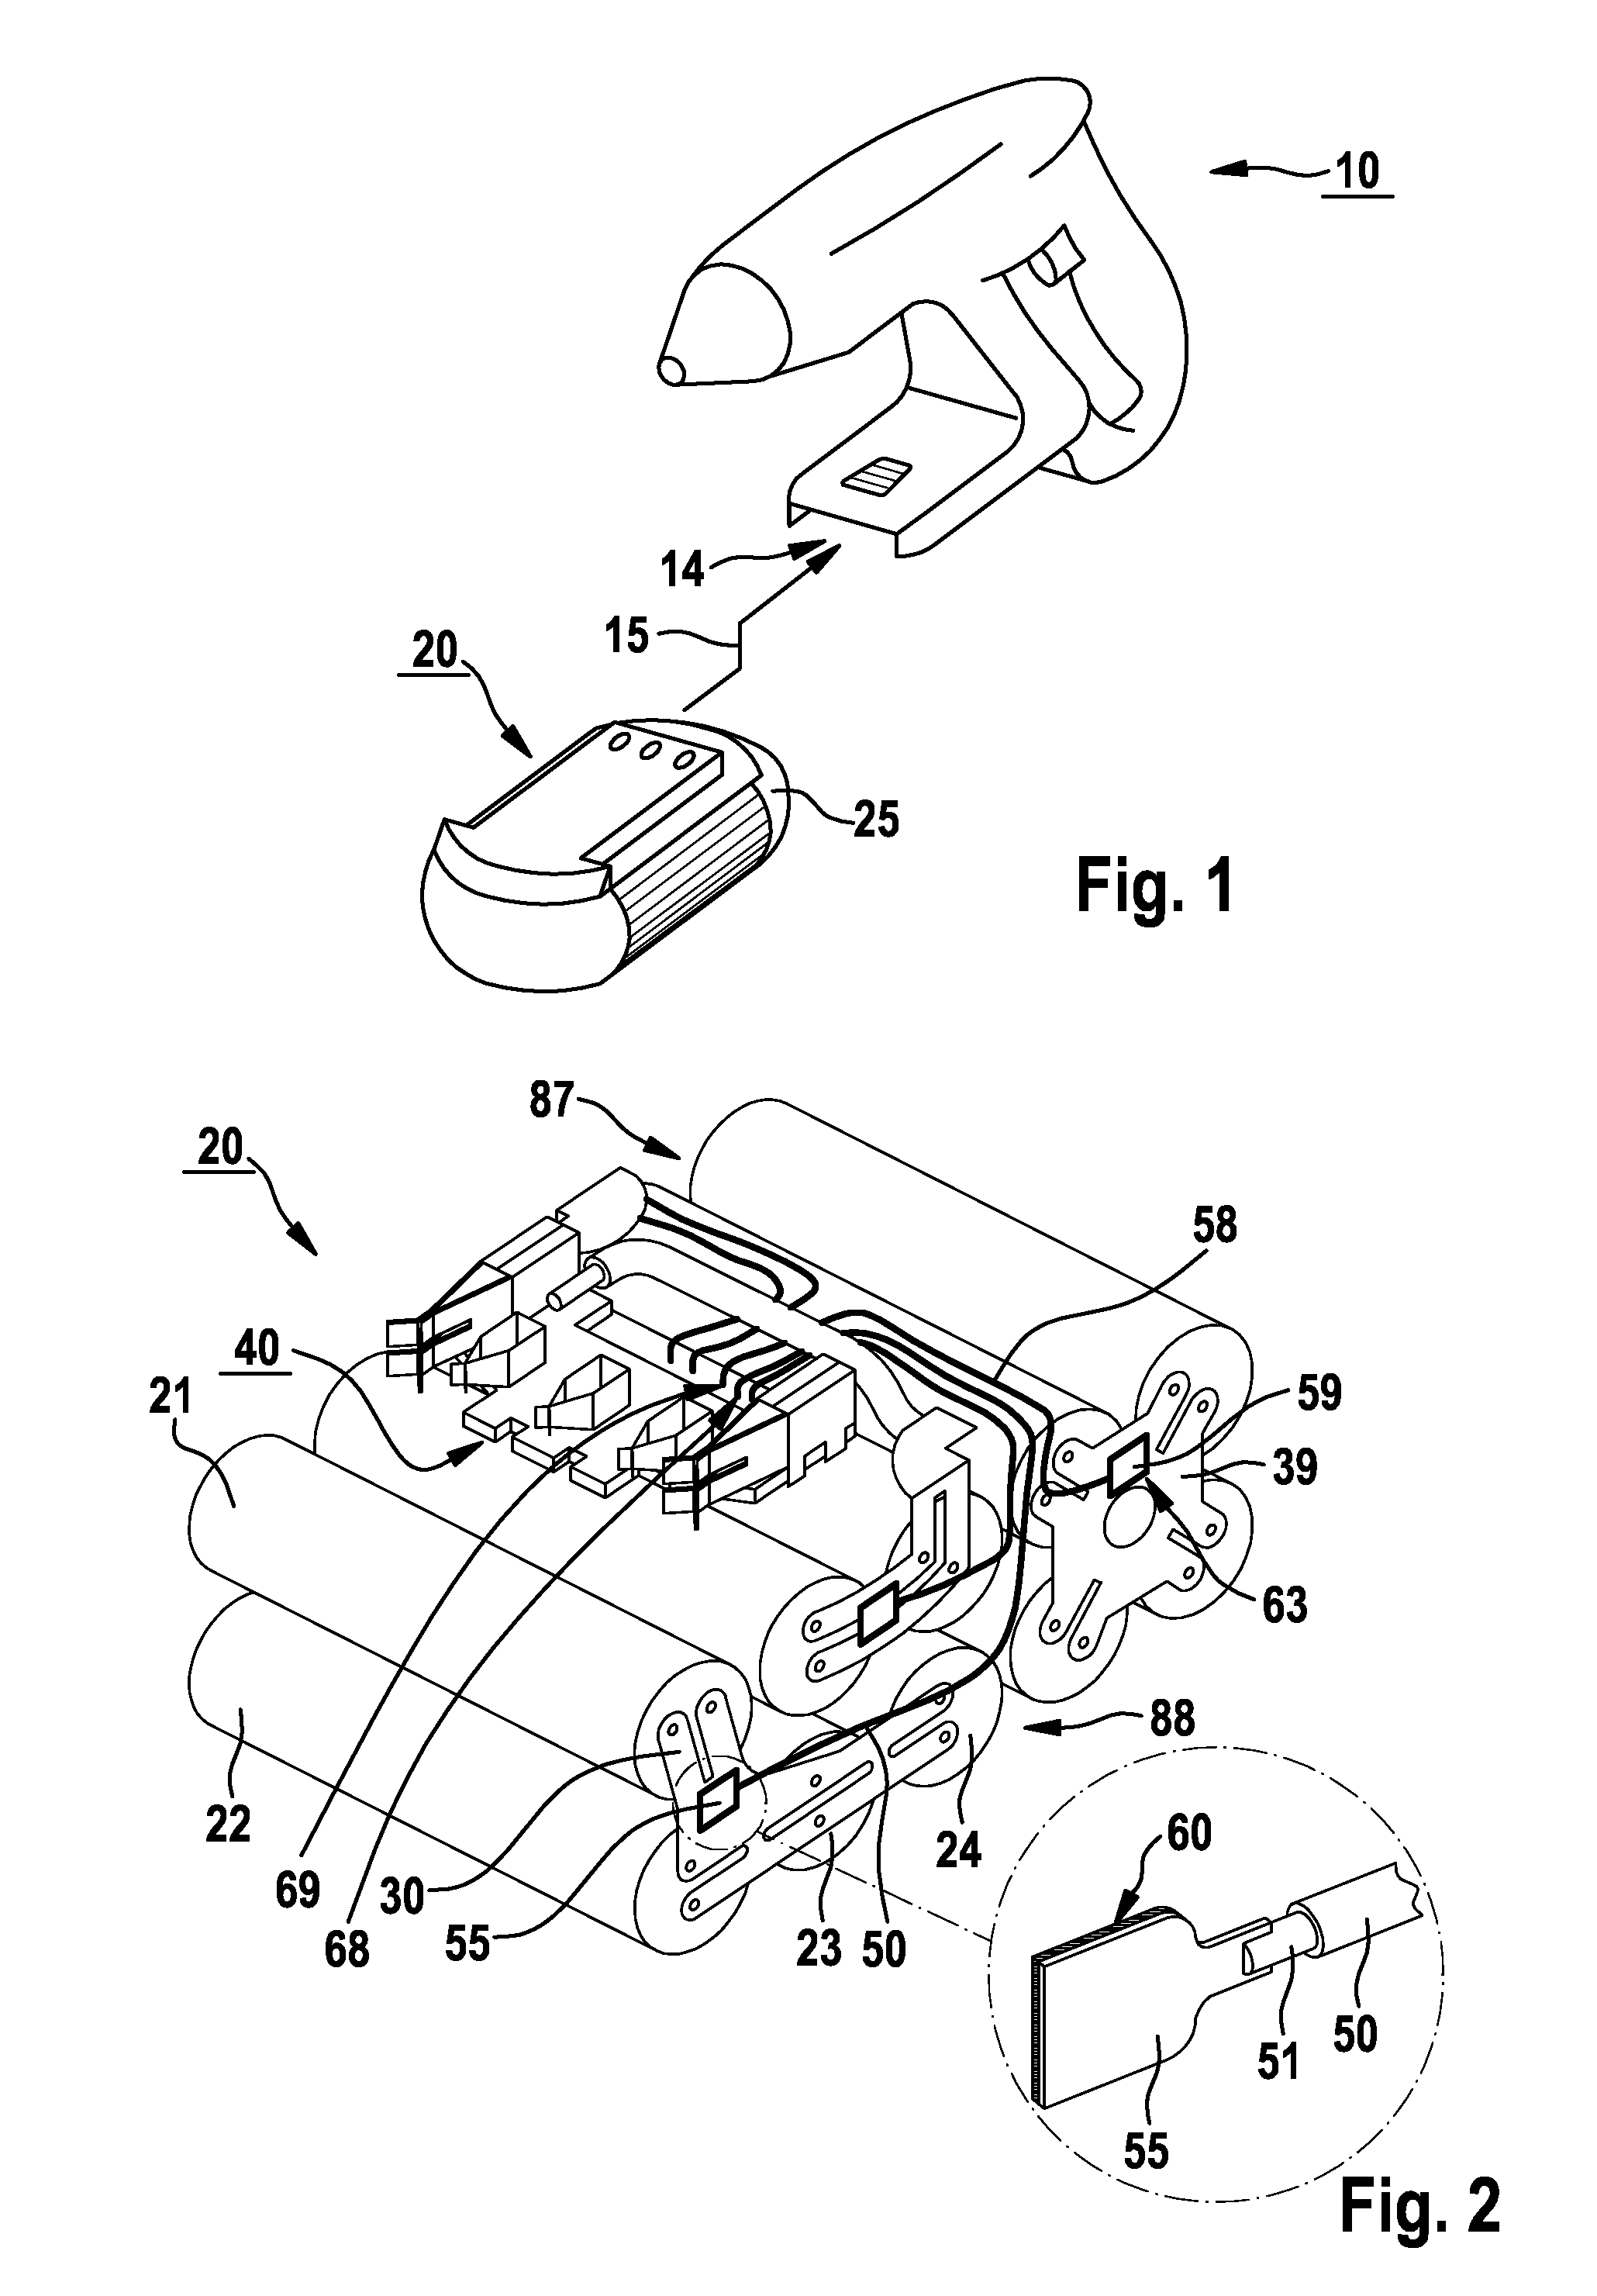 Making electrical contact with a rechargeable battery having a plurality of rechargeable battery cells